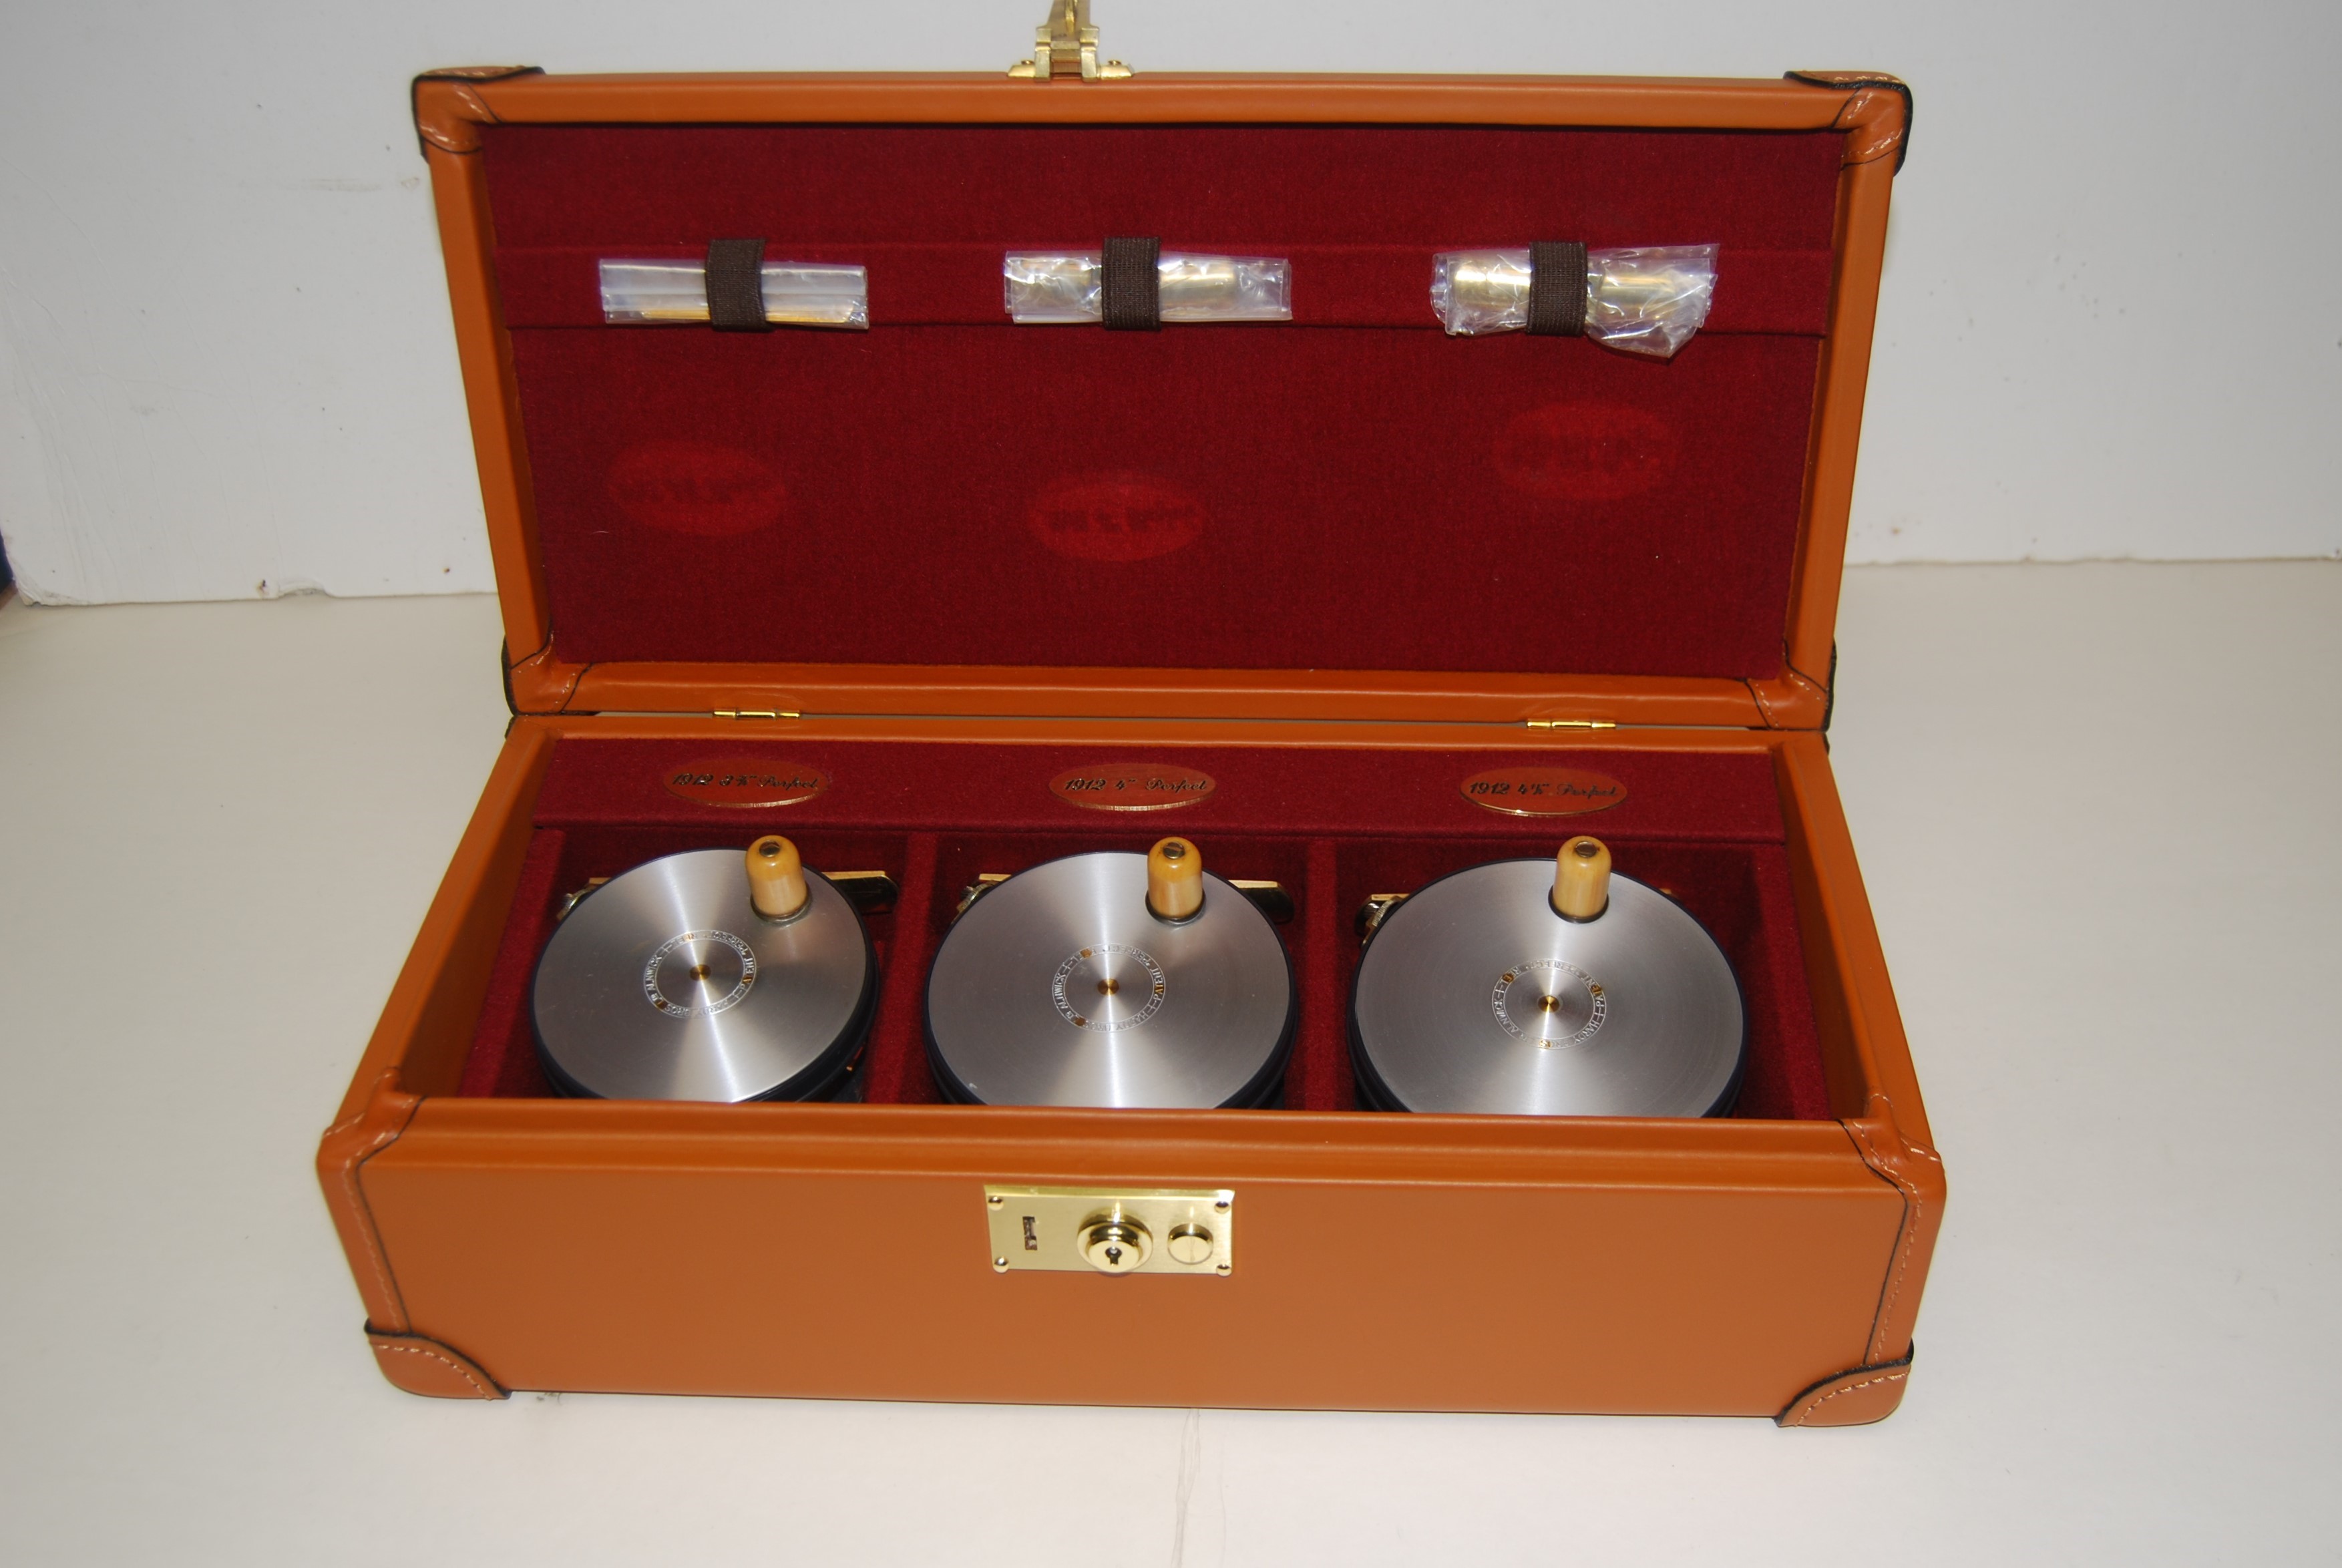 HARDY PERFECT 1912 Wide Spool Salmon Reproduction. LHW. Matched set of 3  reels in Hardy fitted Leather Case. 3 3/4 in., 4 in., 4 1/4 in. #083 of 200  Cased Sets. SOLD